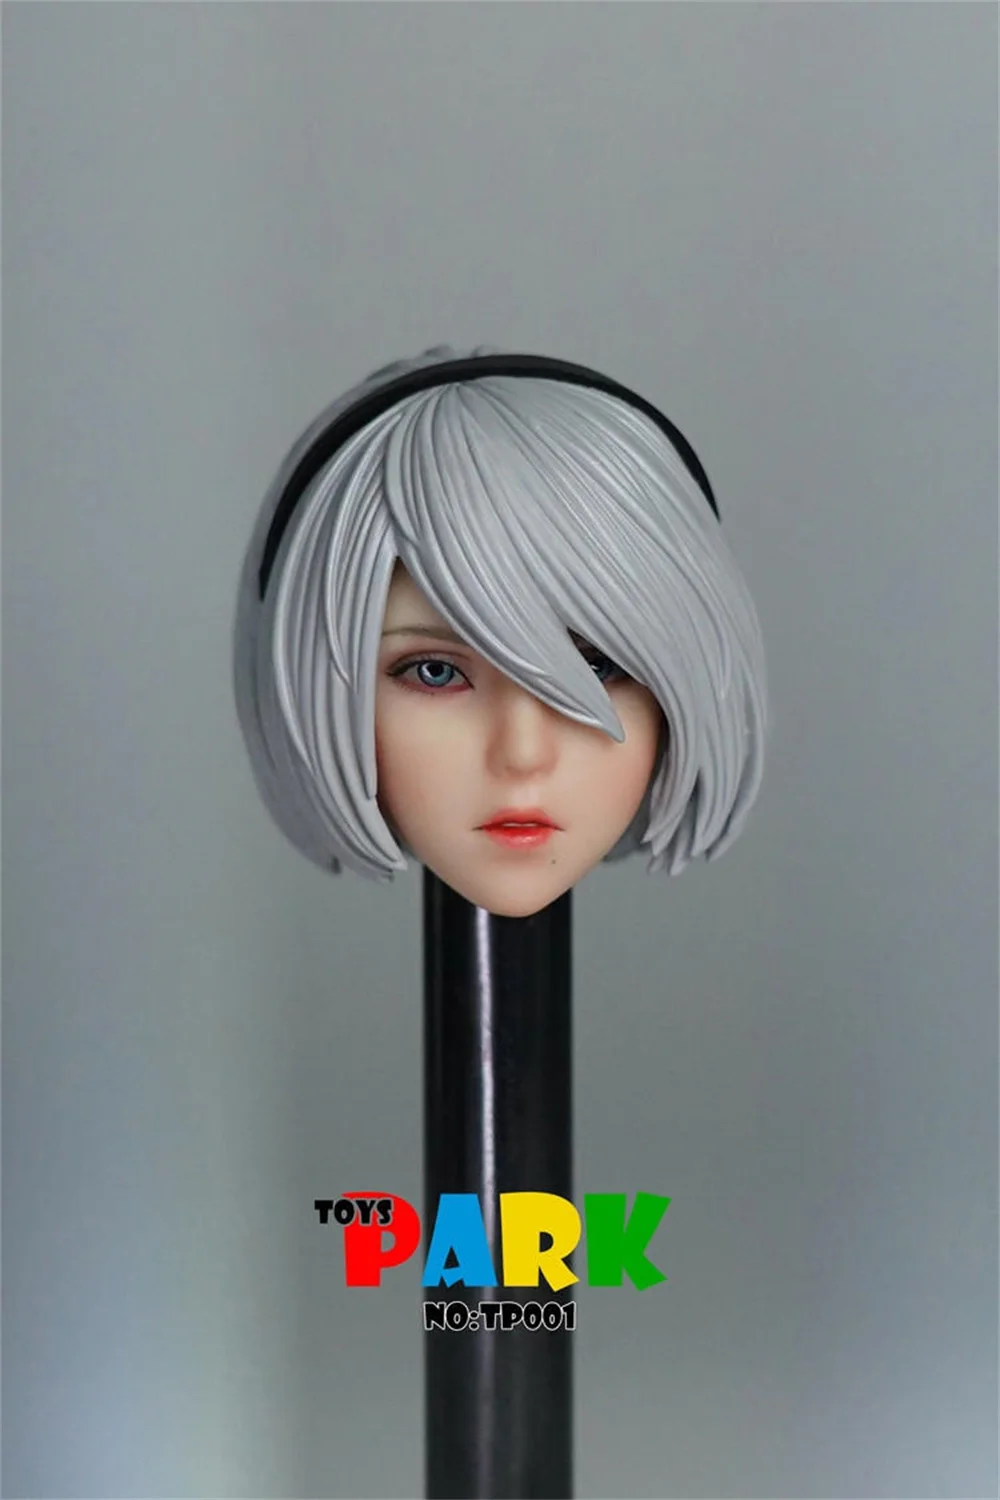 

Toys park TP001 1/6 2B Sister Head Sculpt NieR:Automata Female Head Carving Pale Skin for 12'' PHICEN/TBL Action Figure Body Toy